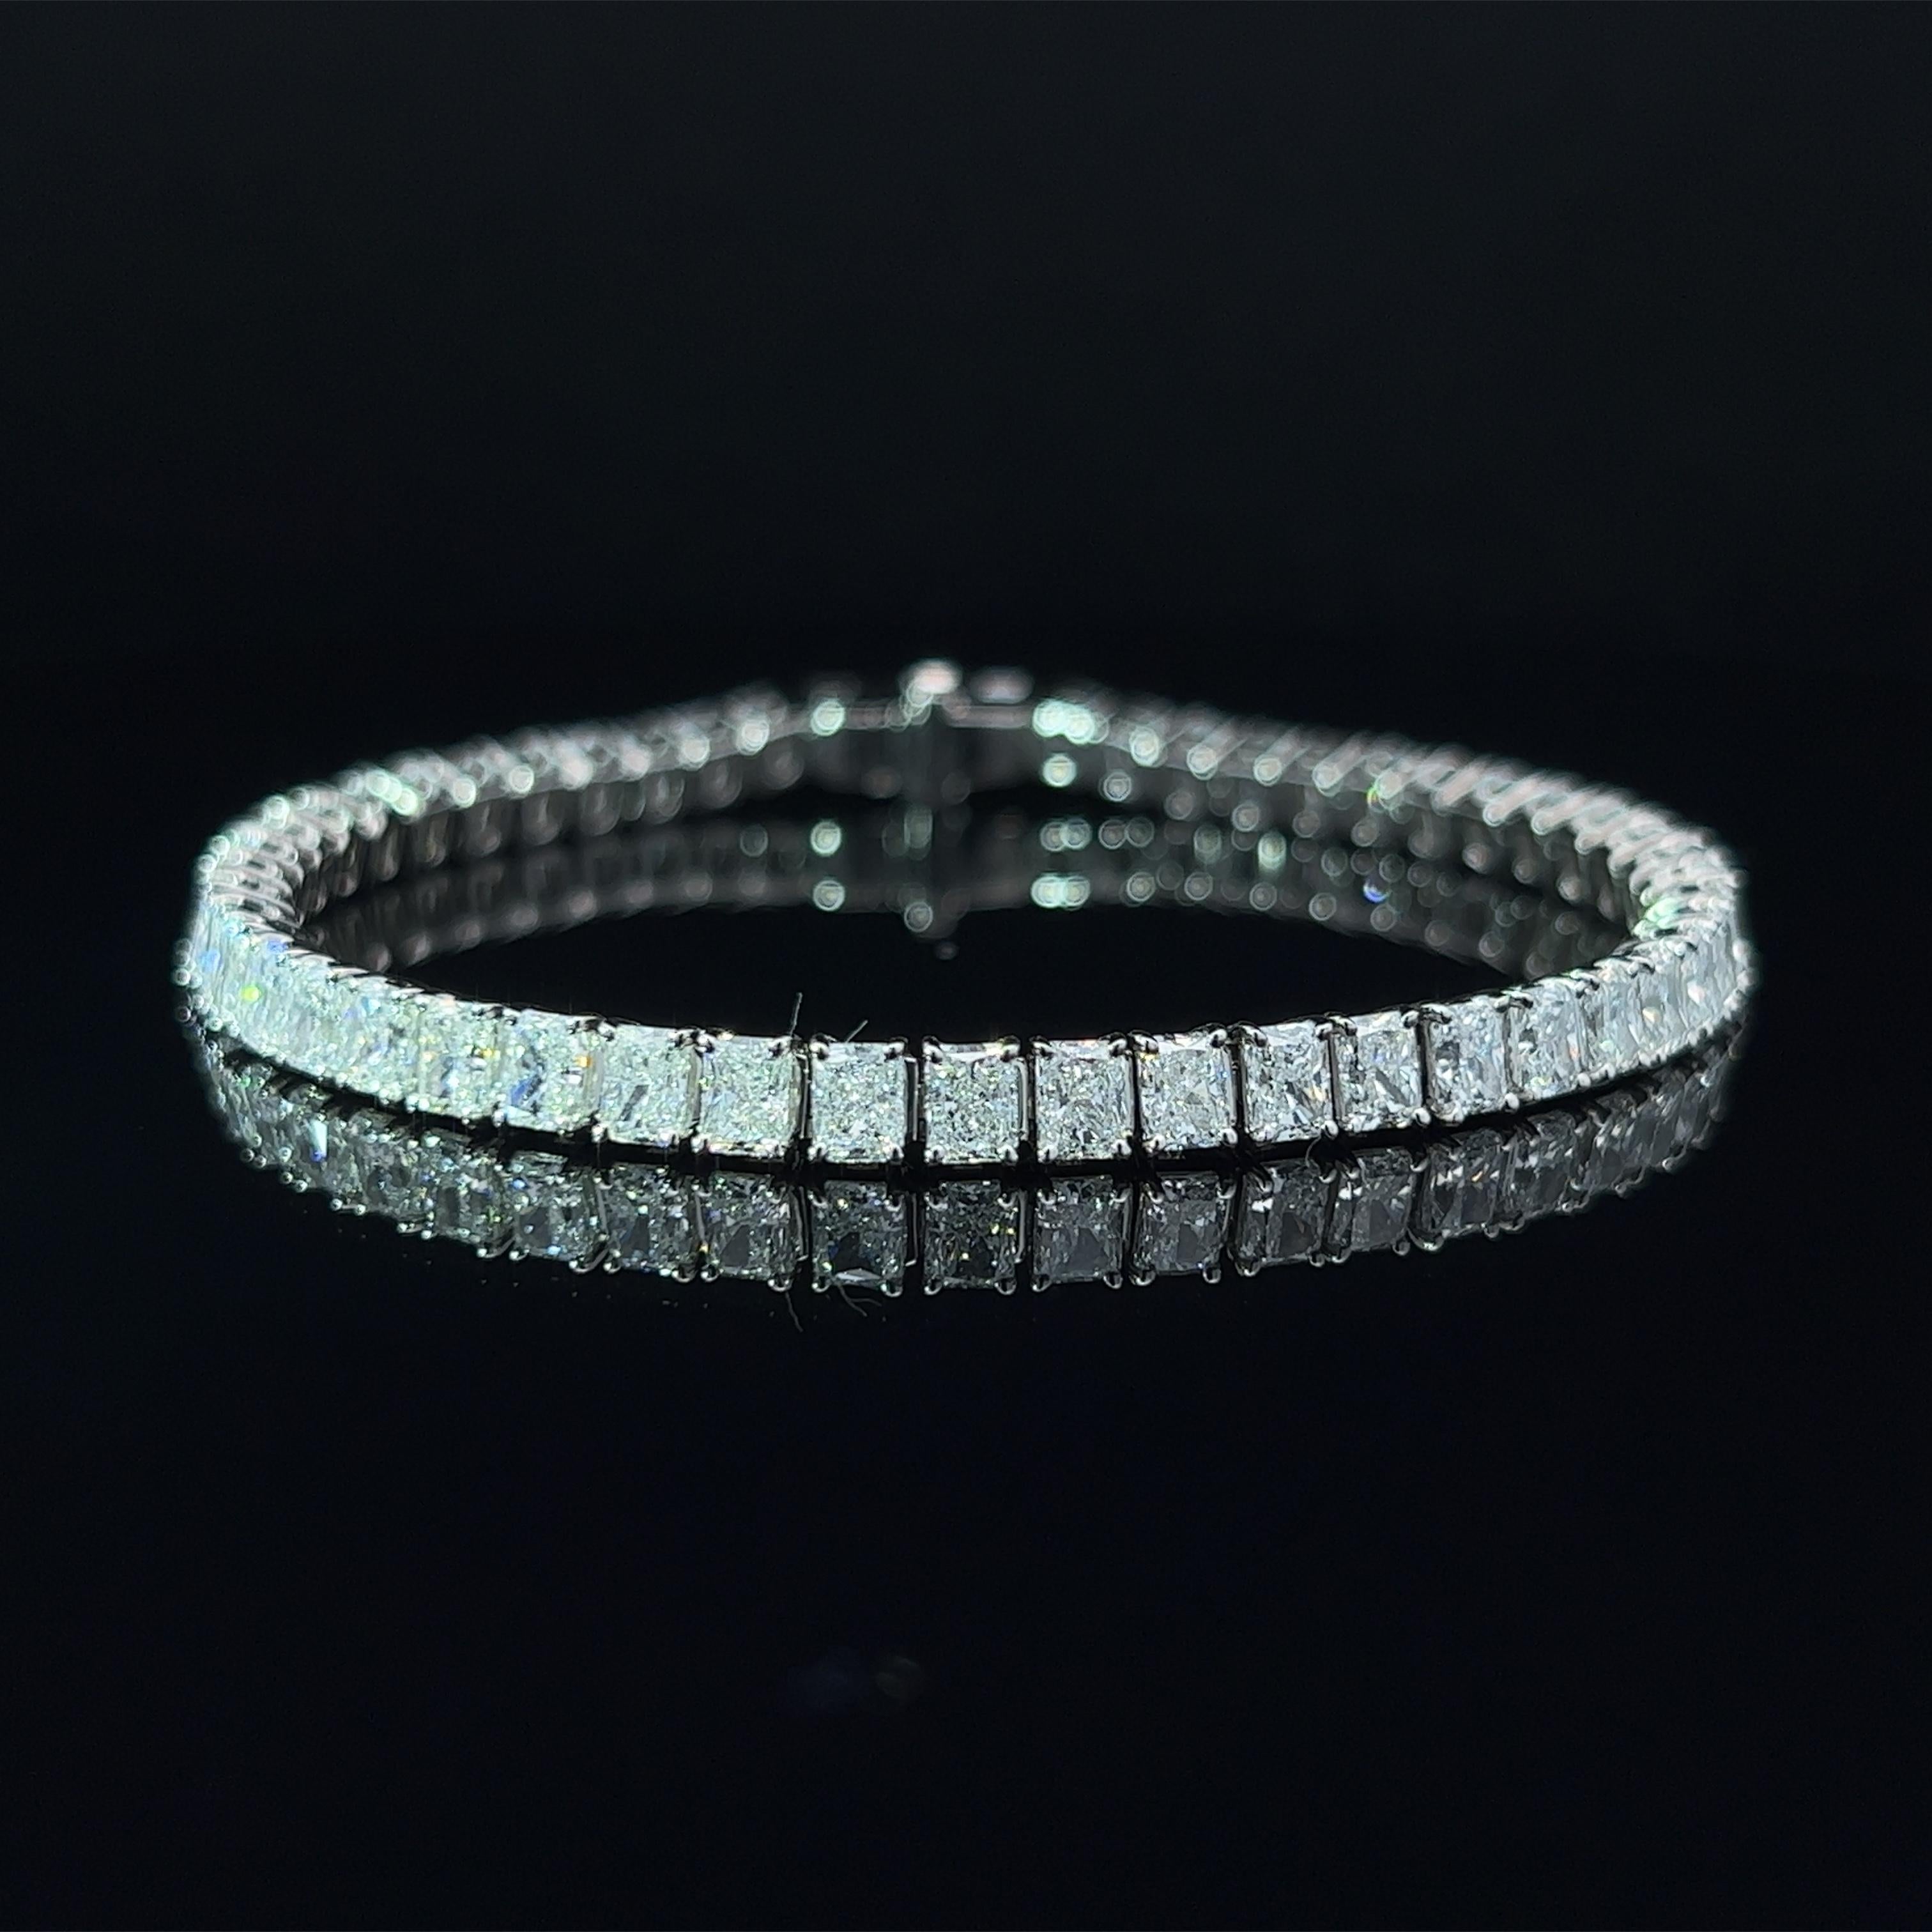 Diamond Shape: Radiant Cut 
Total Diamond Weight: 12.09ct
Individual Diamond Weight: .25ct
Color/Clarity: GH VVS  
Metal: 950 Platinum 
Metal Weight: 19.70g 

Key Features:

Radiant-Cut Diamonds: The centerpiece of this bracelet features a dazzling